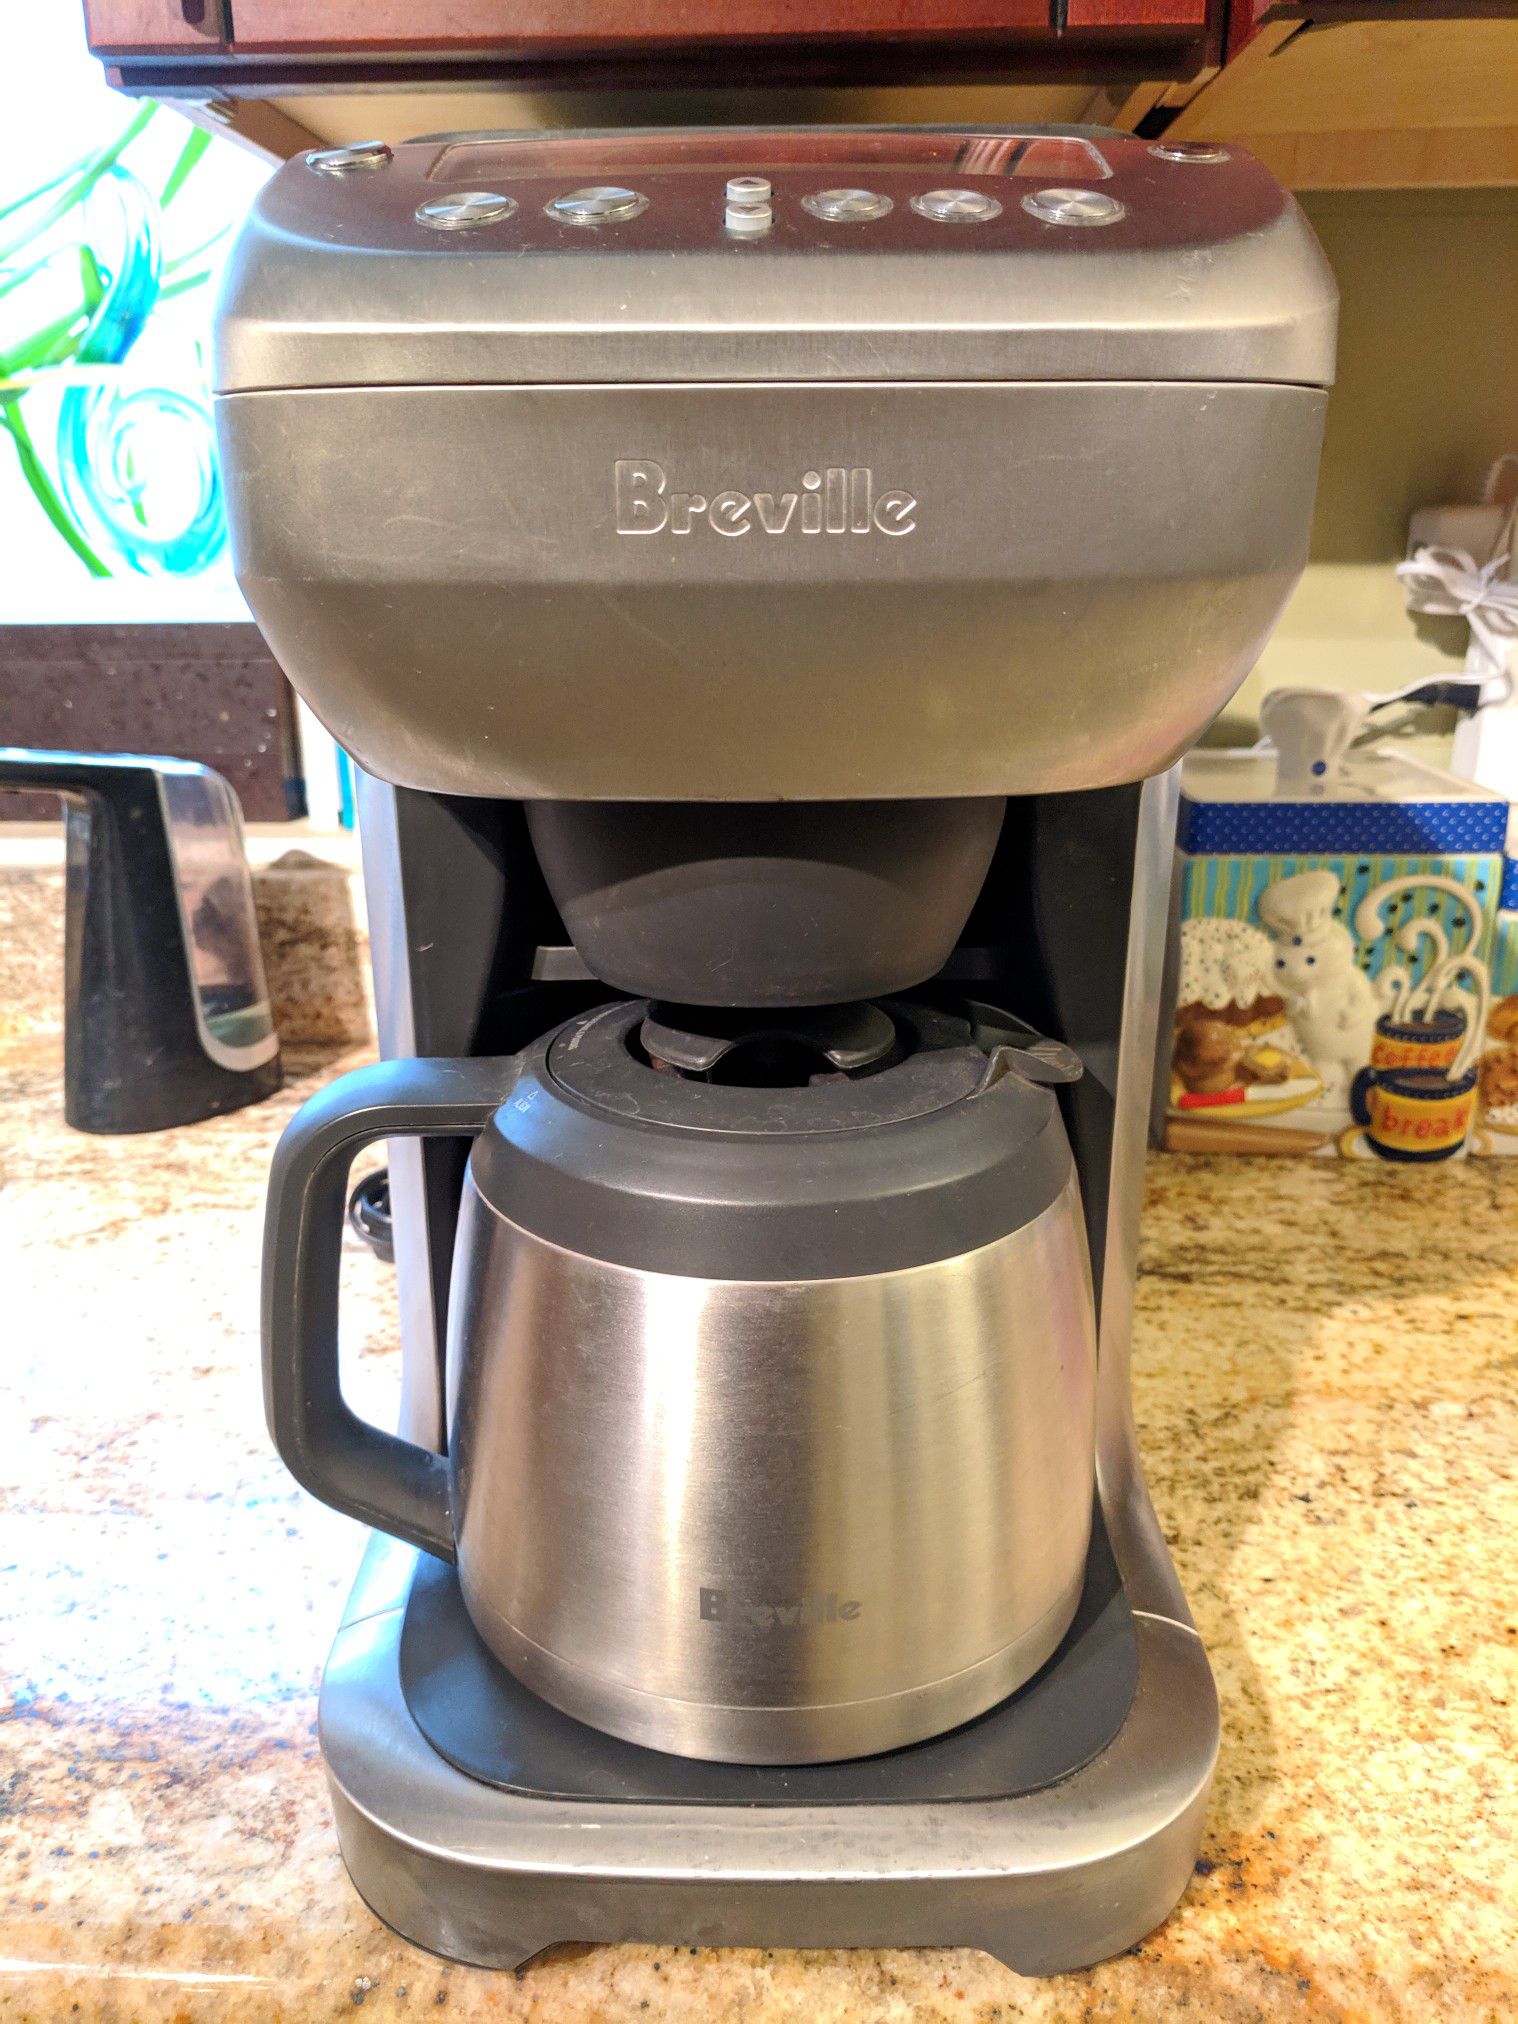 Breville 12 Cup Coffee maker